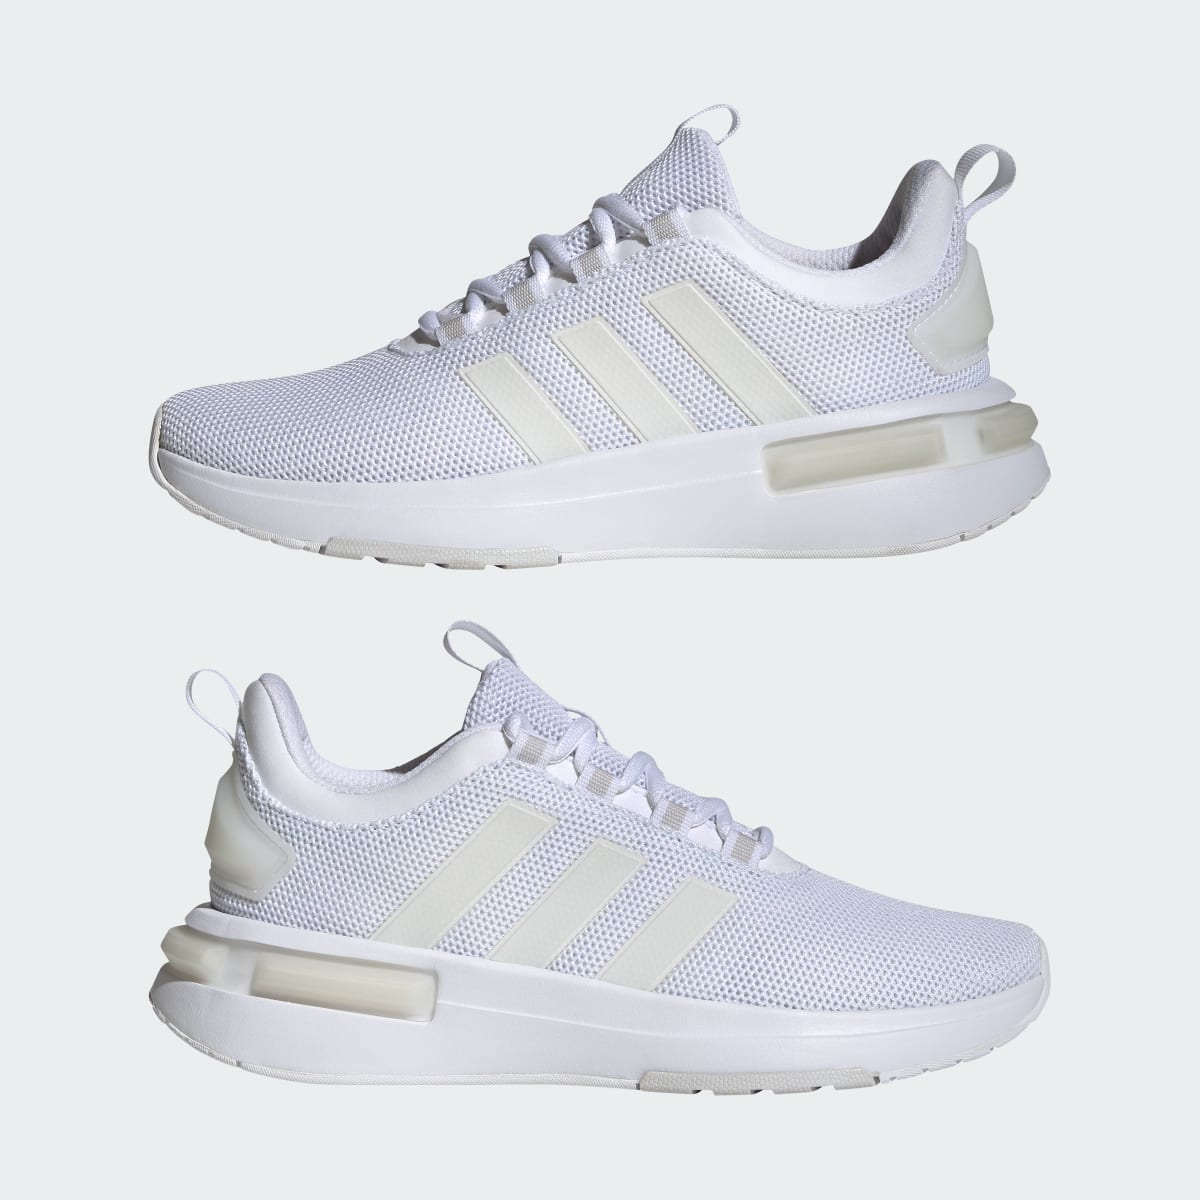 Adidas Racer TR23 Shoes. 8